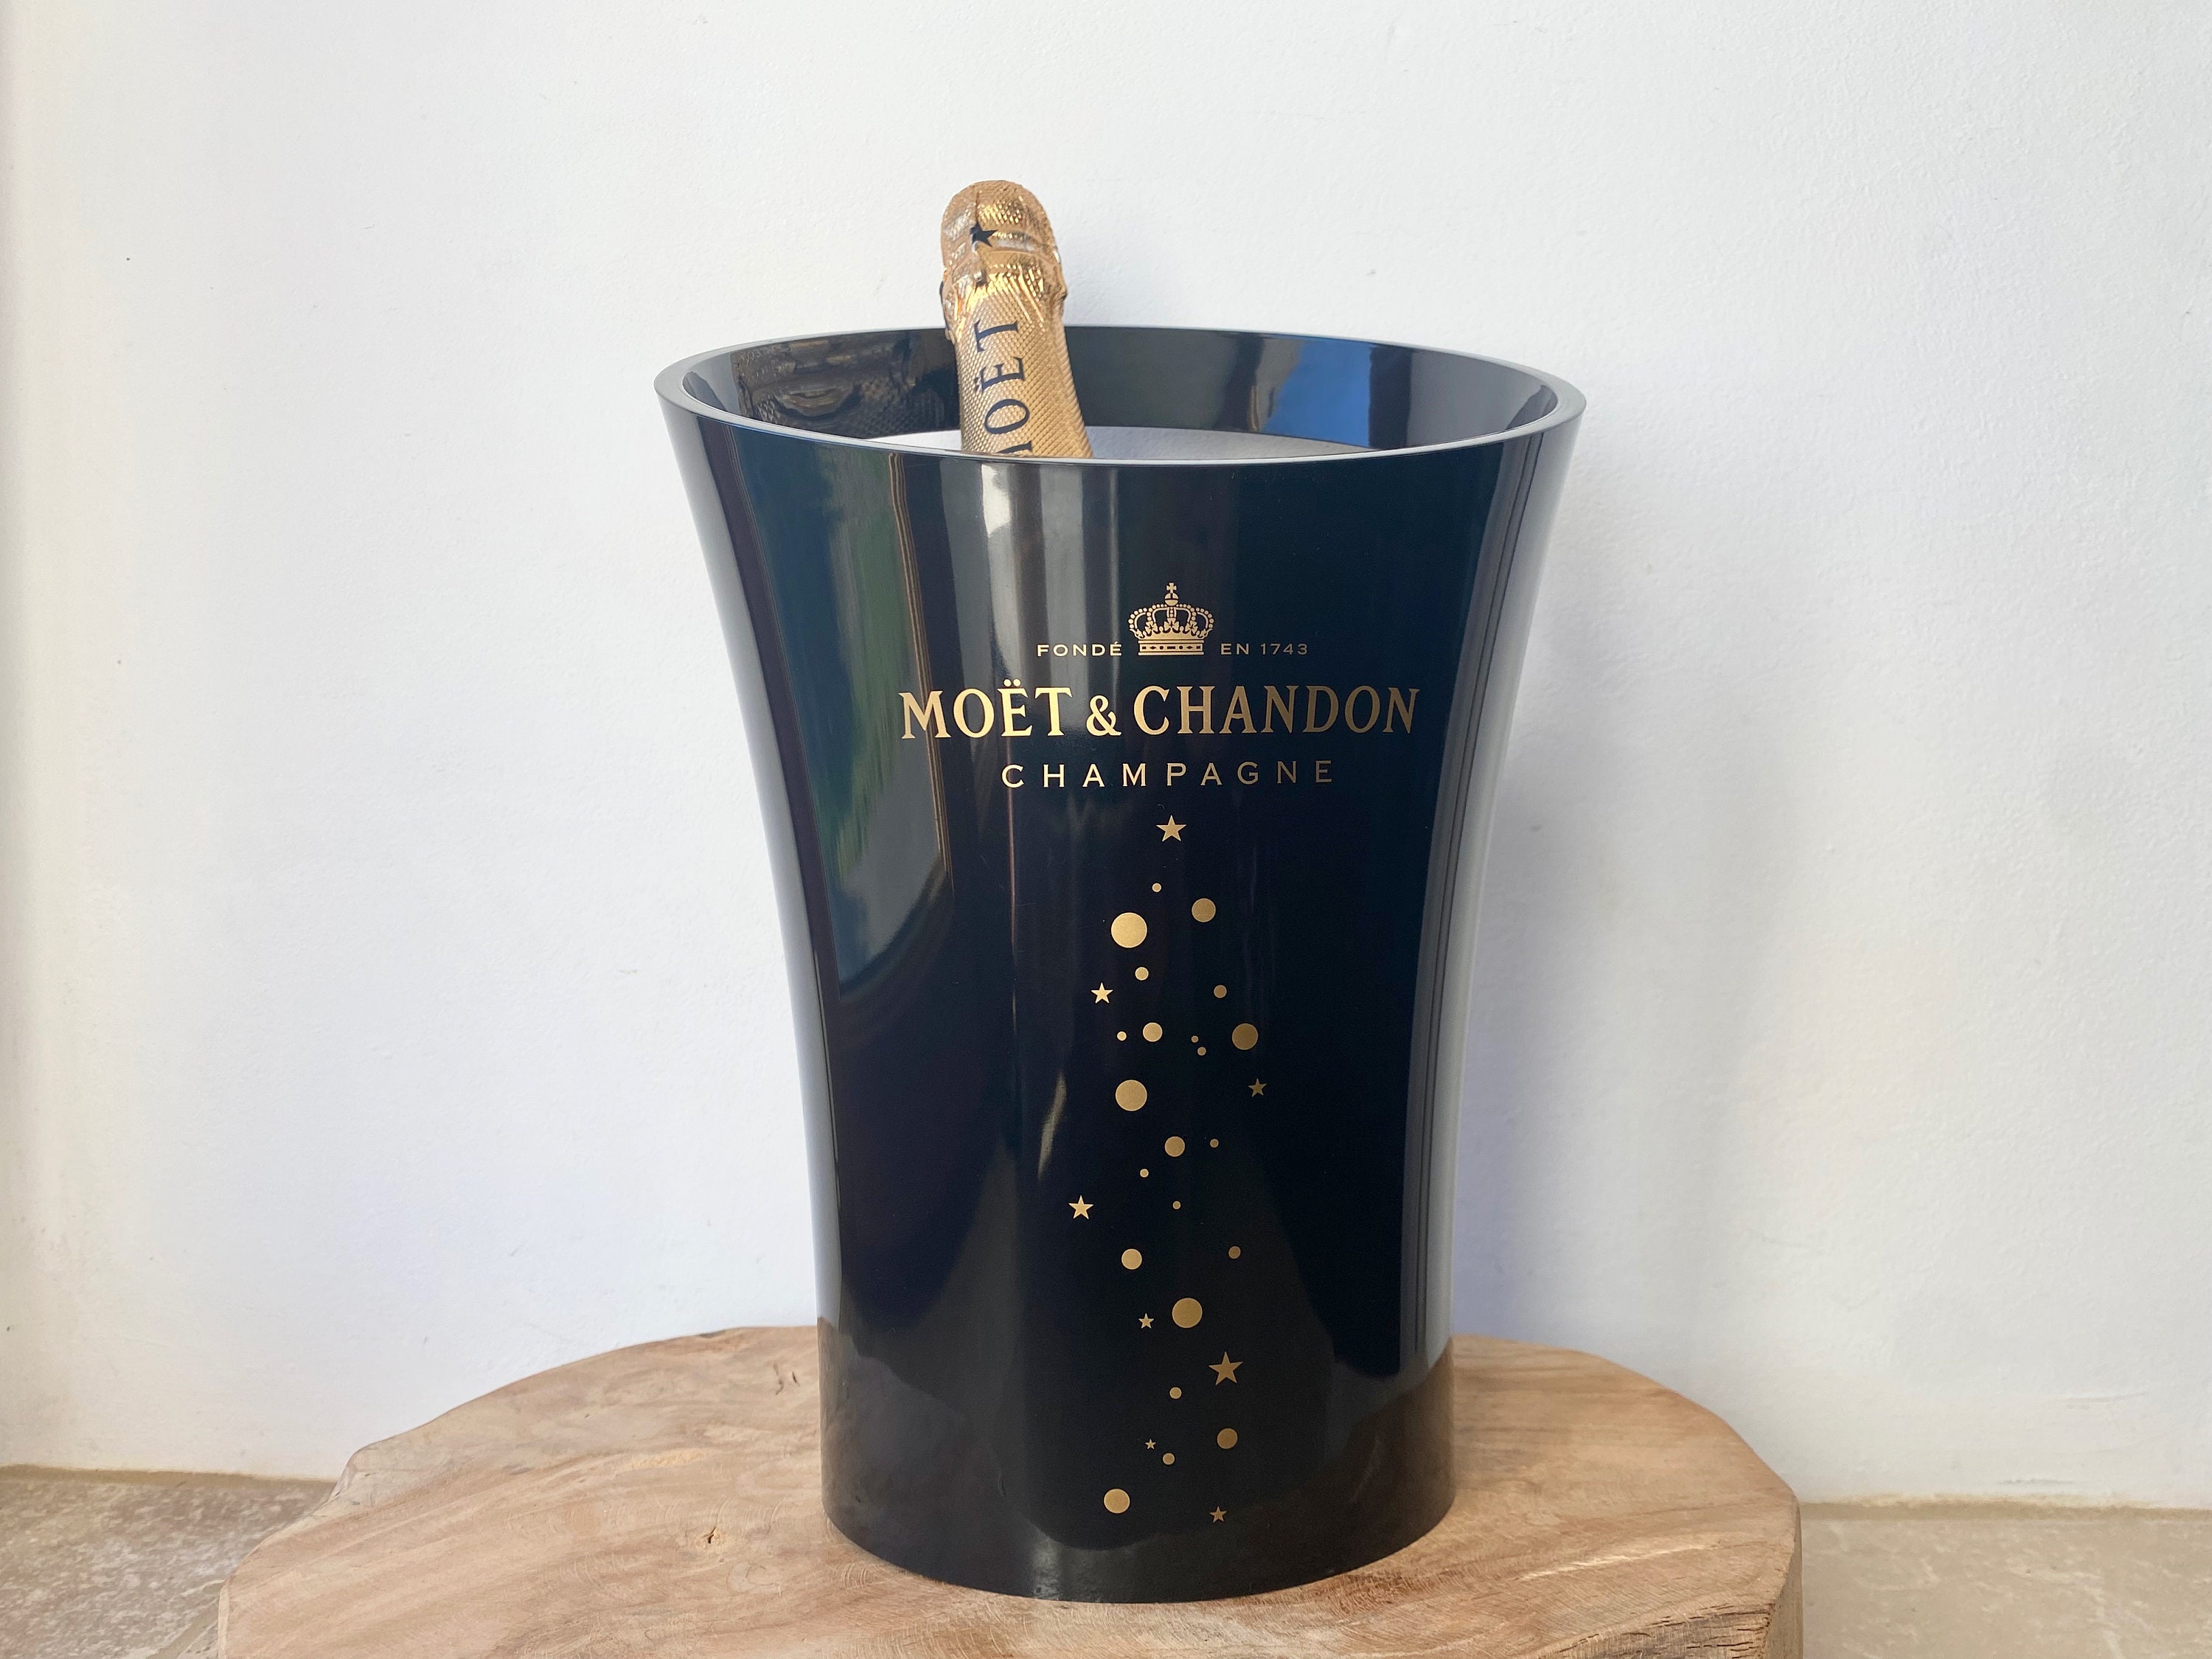  Moët & Chandon Ice Impérial Champagne Ice Bucket Bottle Cooler  - New Limited Edition Design: Home & Kitchen